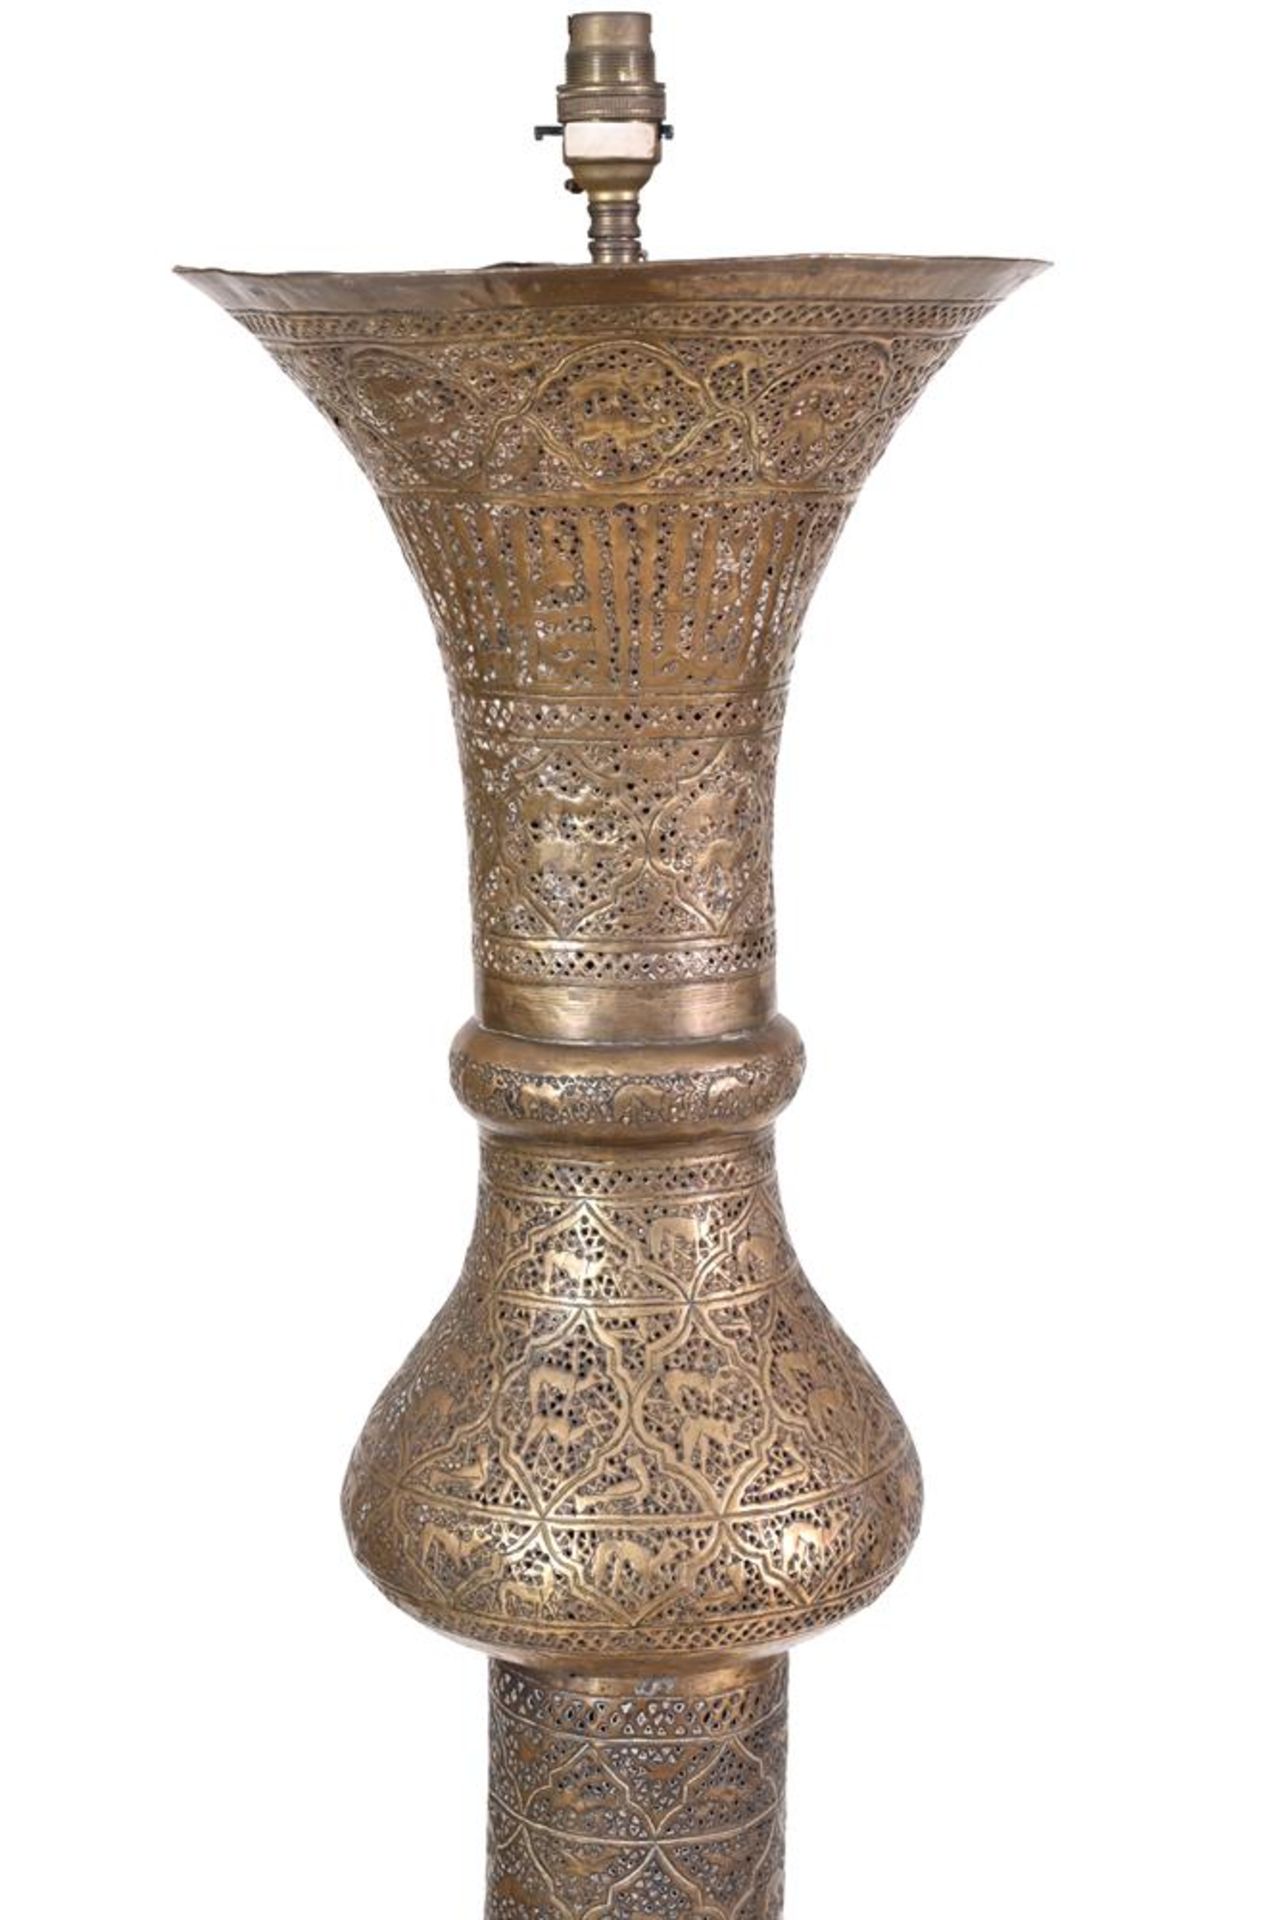 A BRASS STANDARD LAMP, 19TH/ 20TH CENTURY, SYRIA - Image 5 of 5